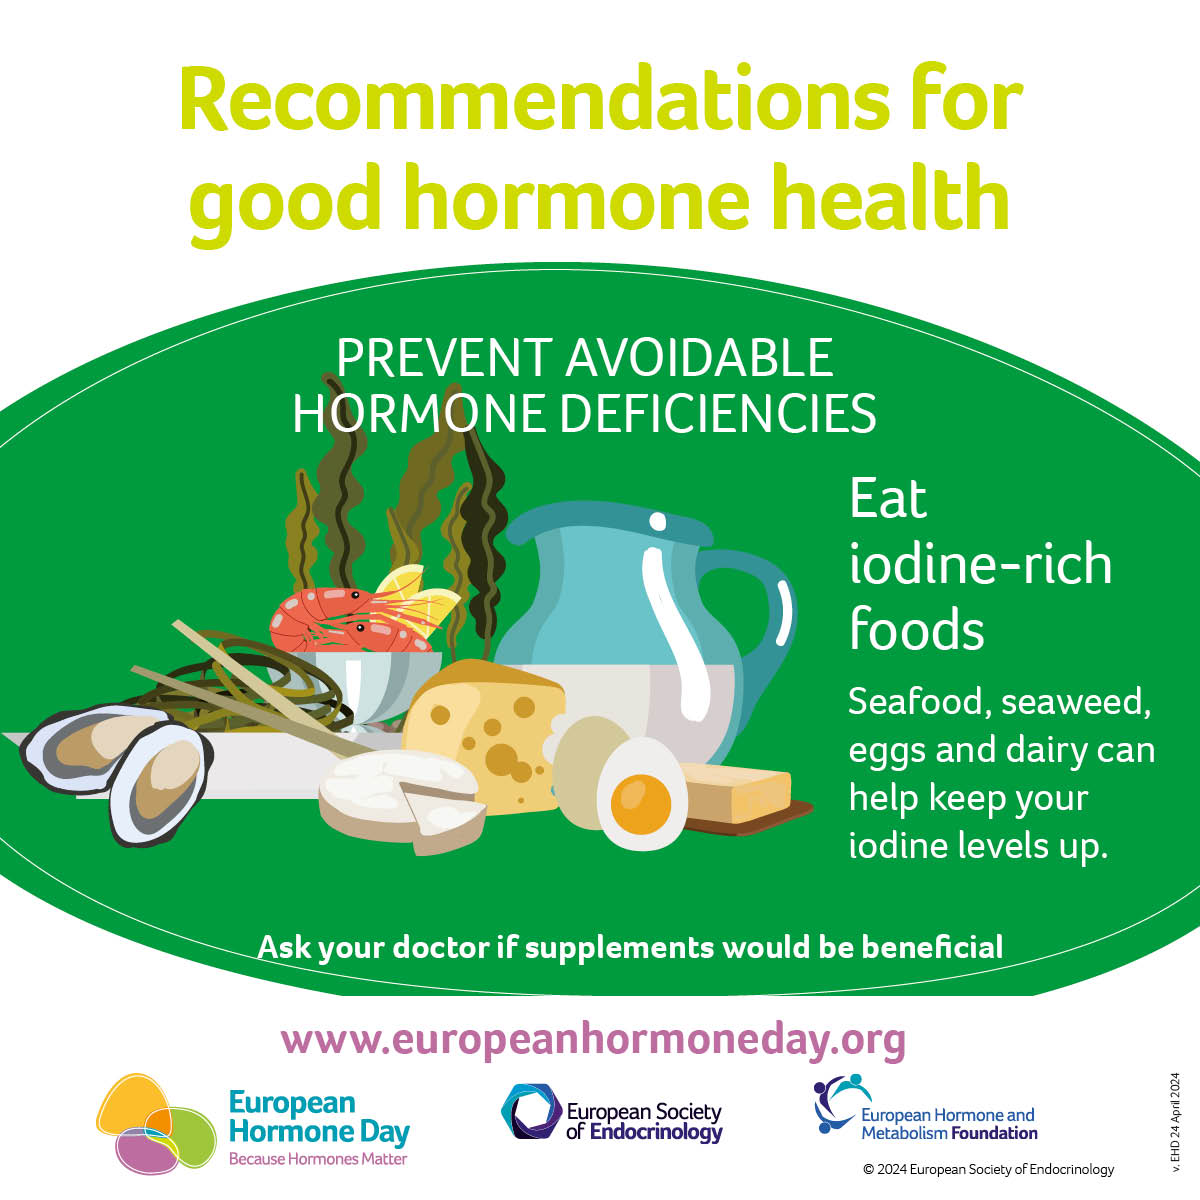 Why is iodine important for good hormone health? The thyroid gland needs iodine to produce hormones, and iodine deficiency can cause hypothyroidism. Learn more about the thyroid gland on @your_hormones website: ow.ly/9Jo350Rn9MZ #BecauseHormonesMatter #EuropeanHormoneDay